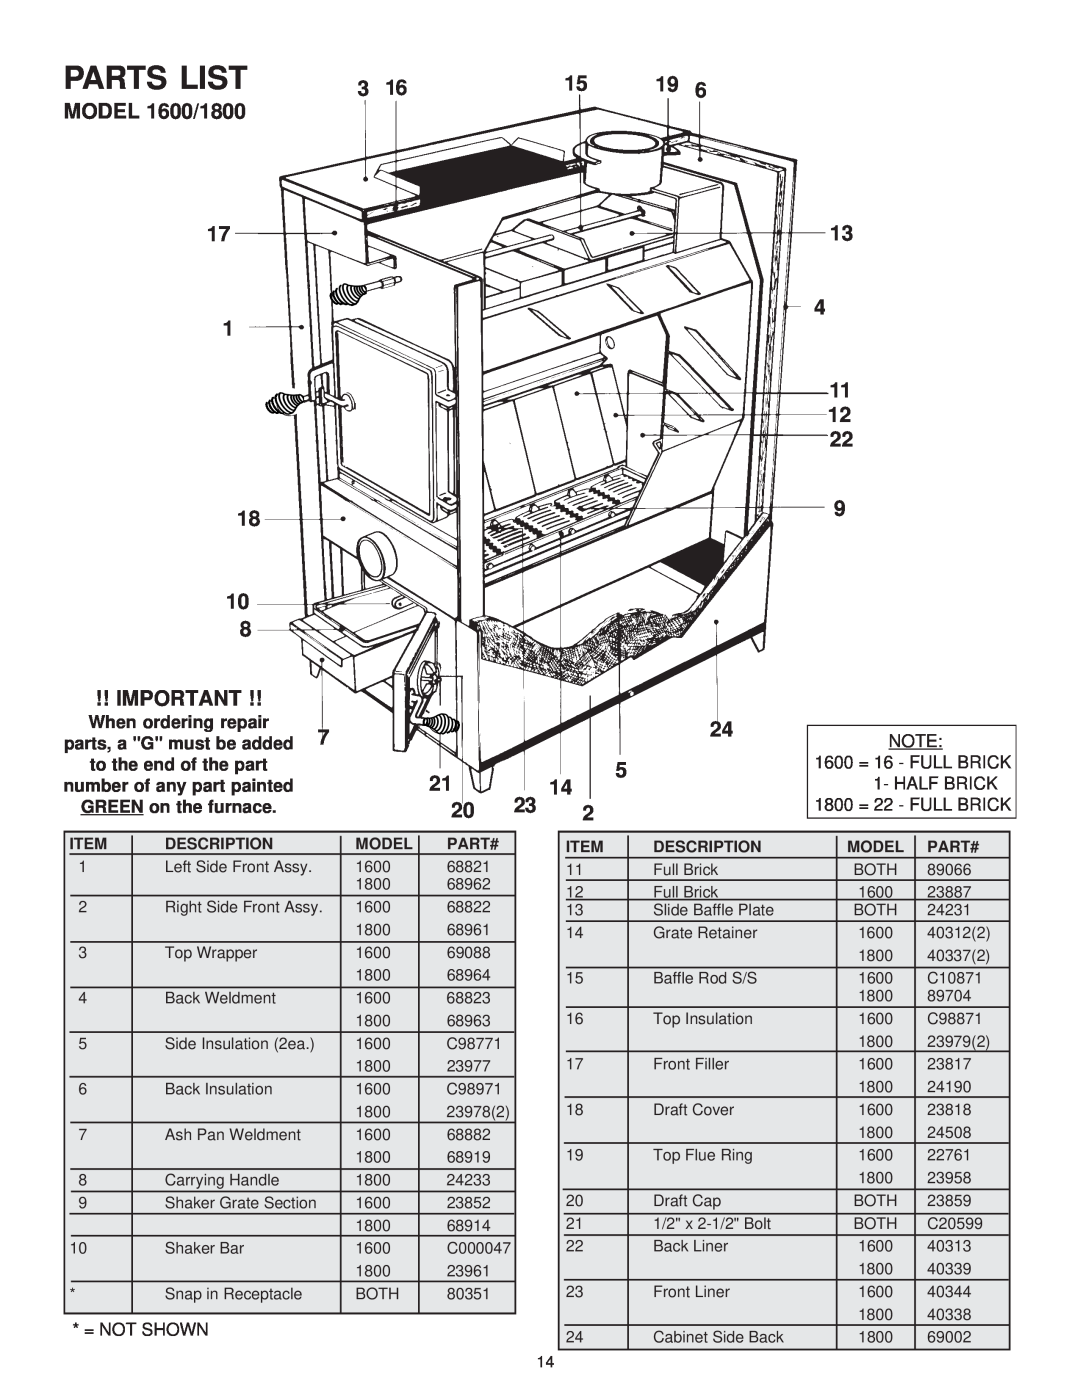 United States Stove manual Parts List, MODEL 1600/1800, 17 1 